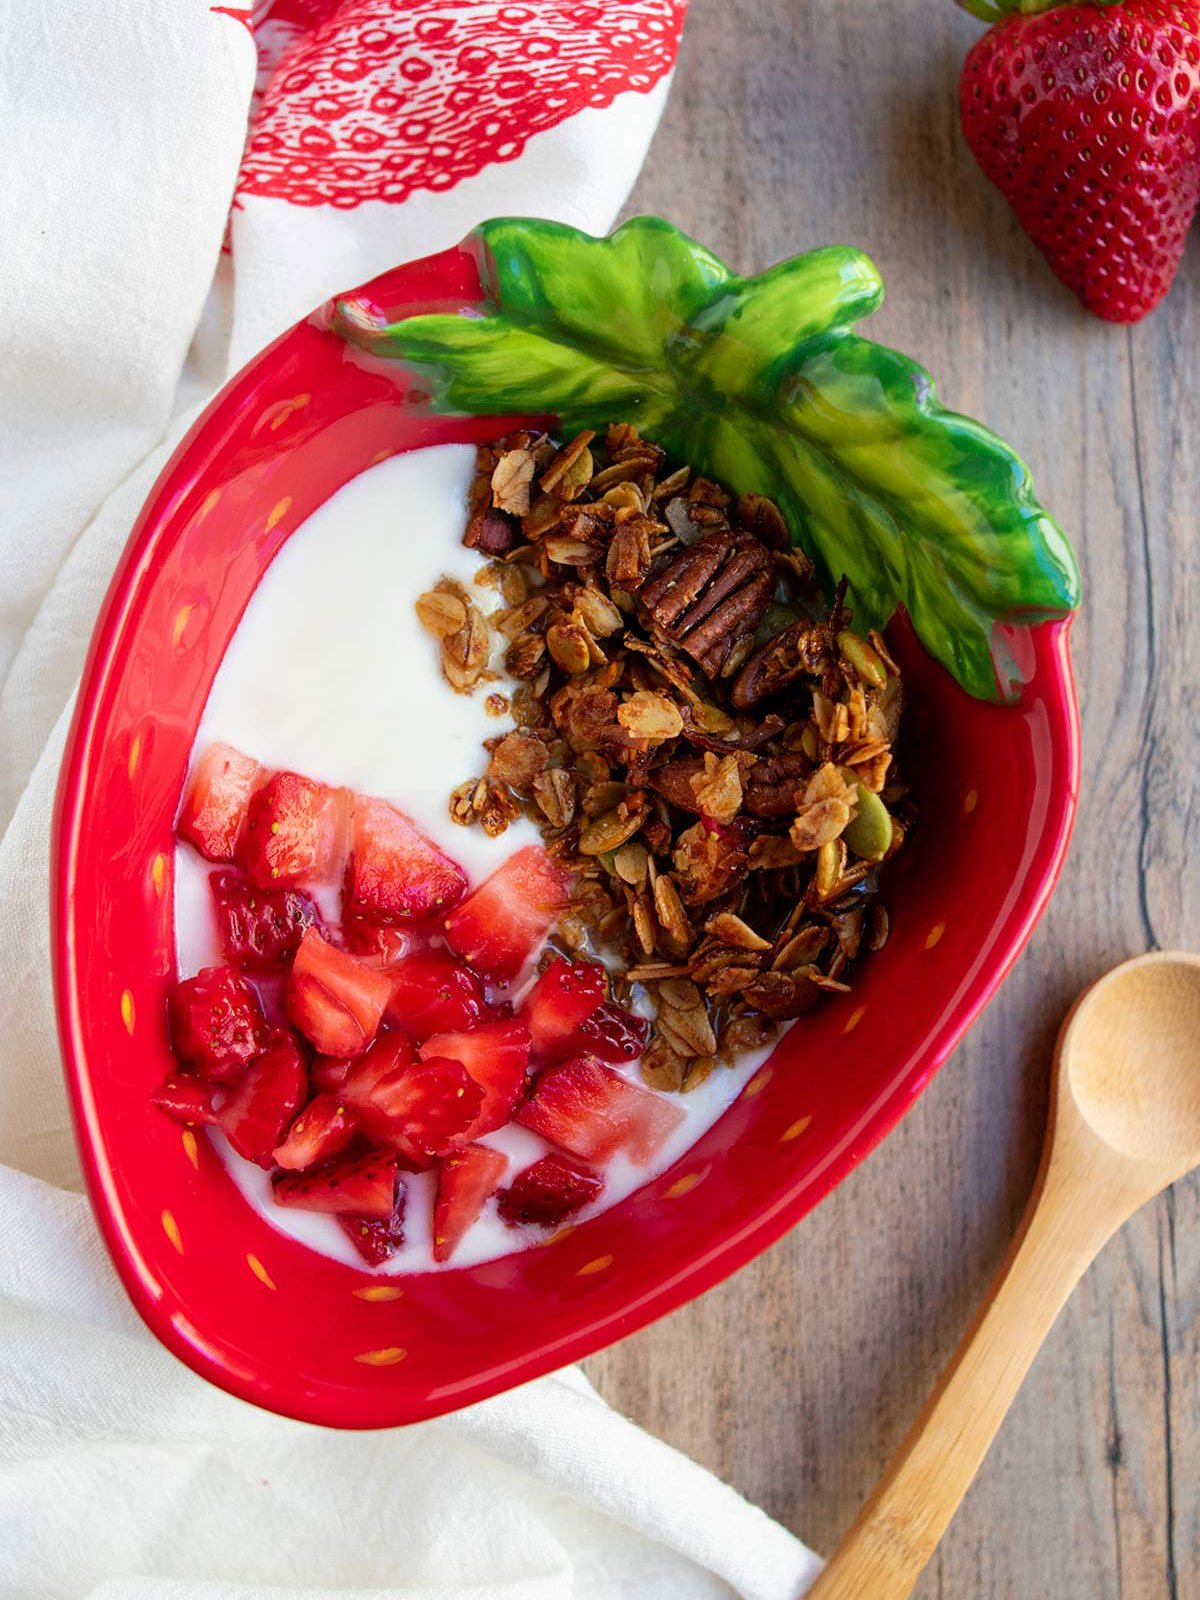 Olive oil granola in a strawberry shaped bowl with yogurt and fresh strawberries.